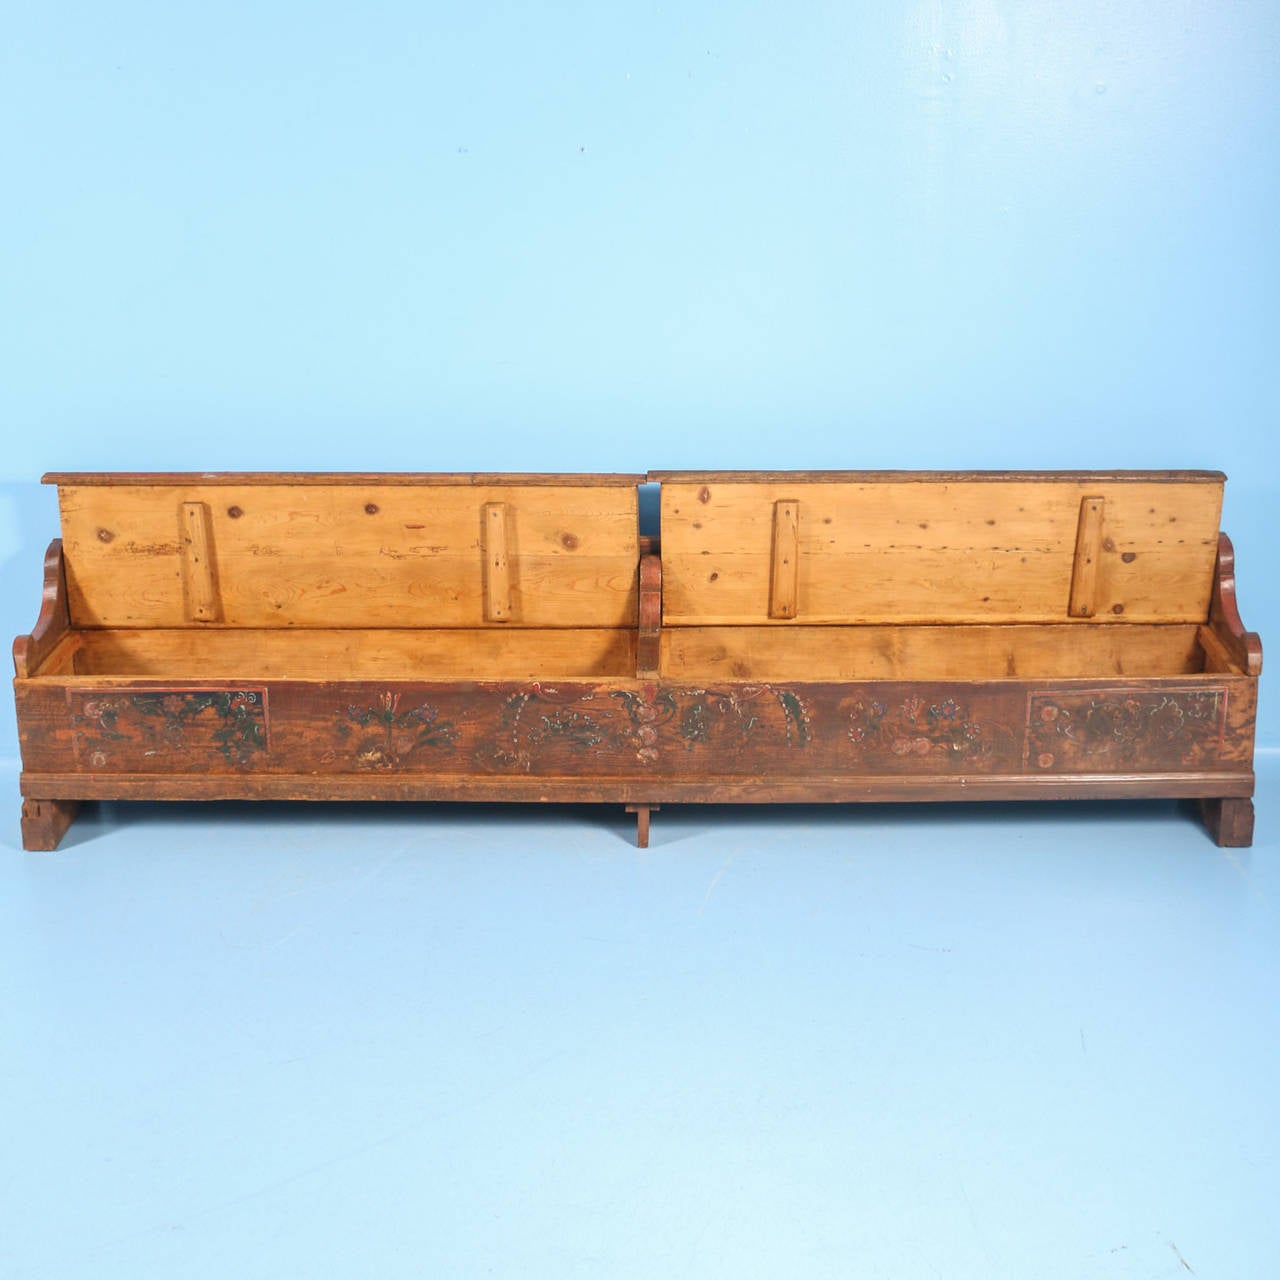 20th Century Long Original Painted Red and Blue Romanian Bench with Storage, Dated 1909